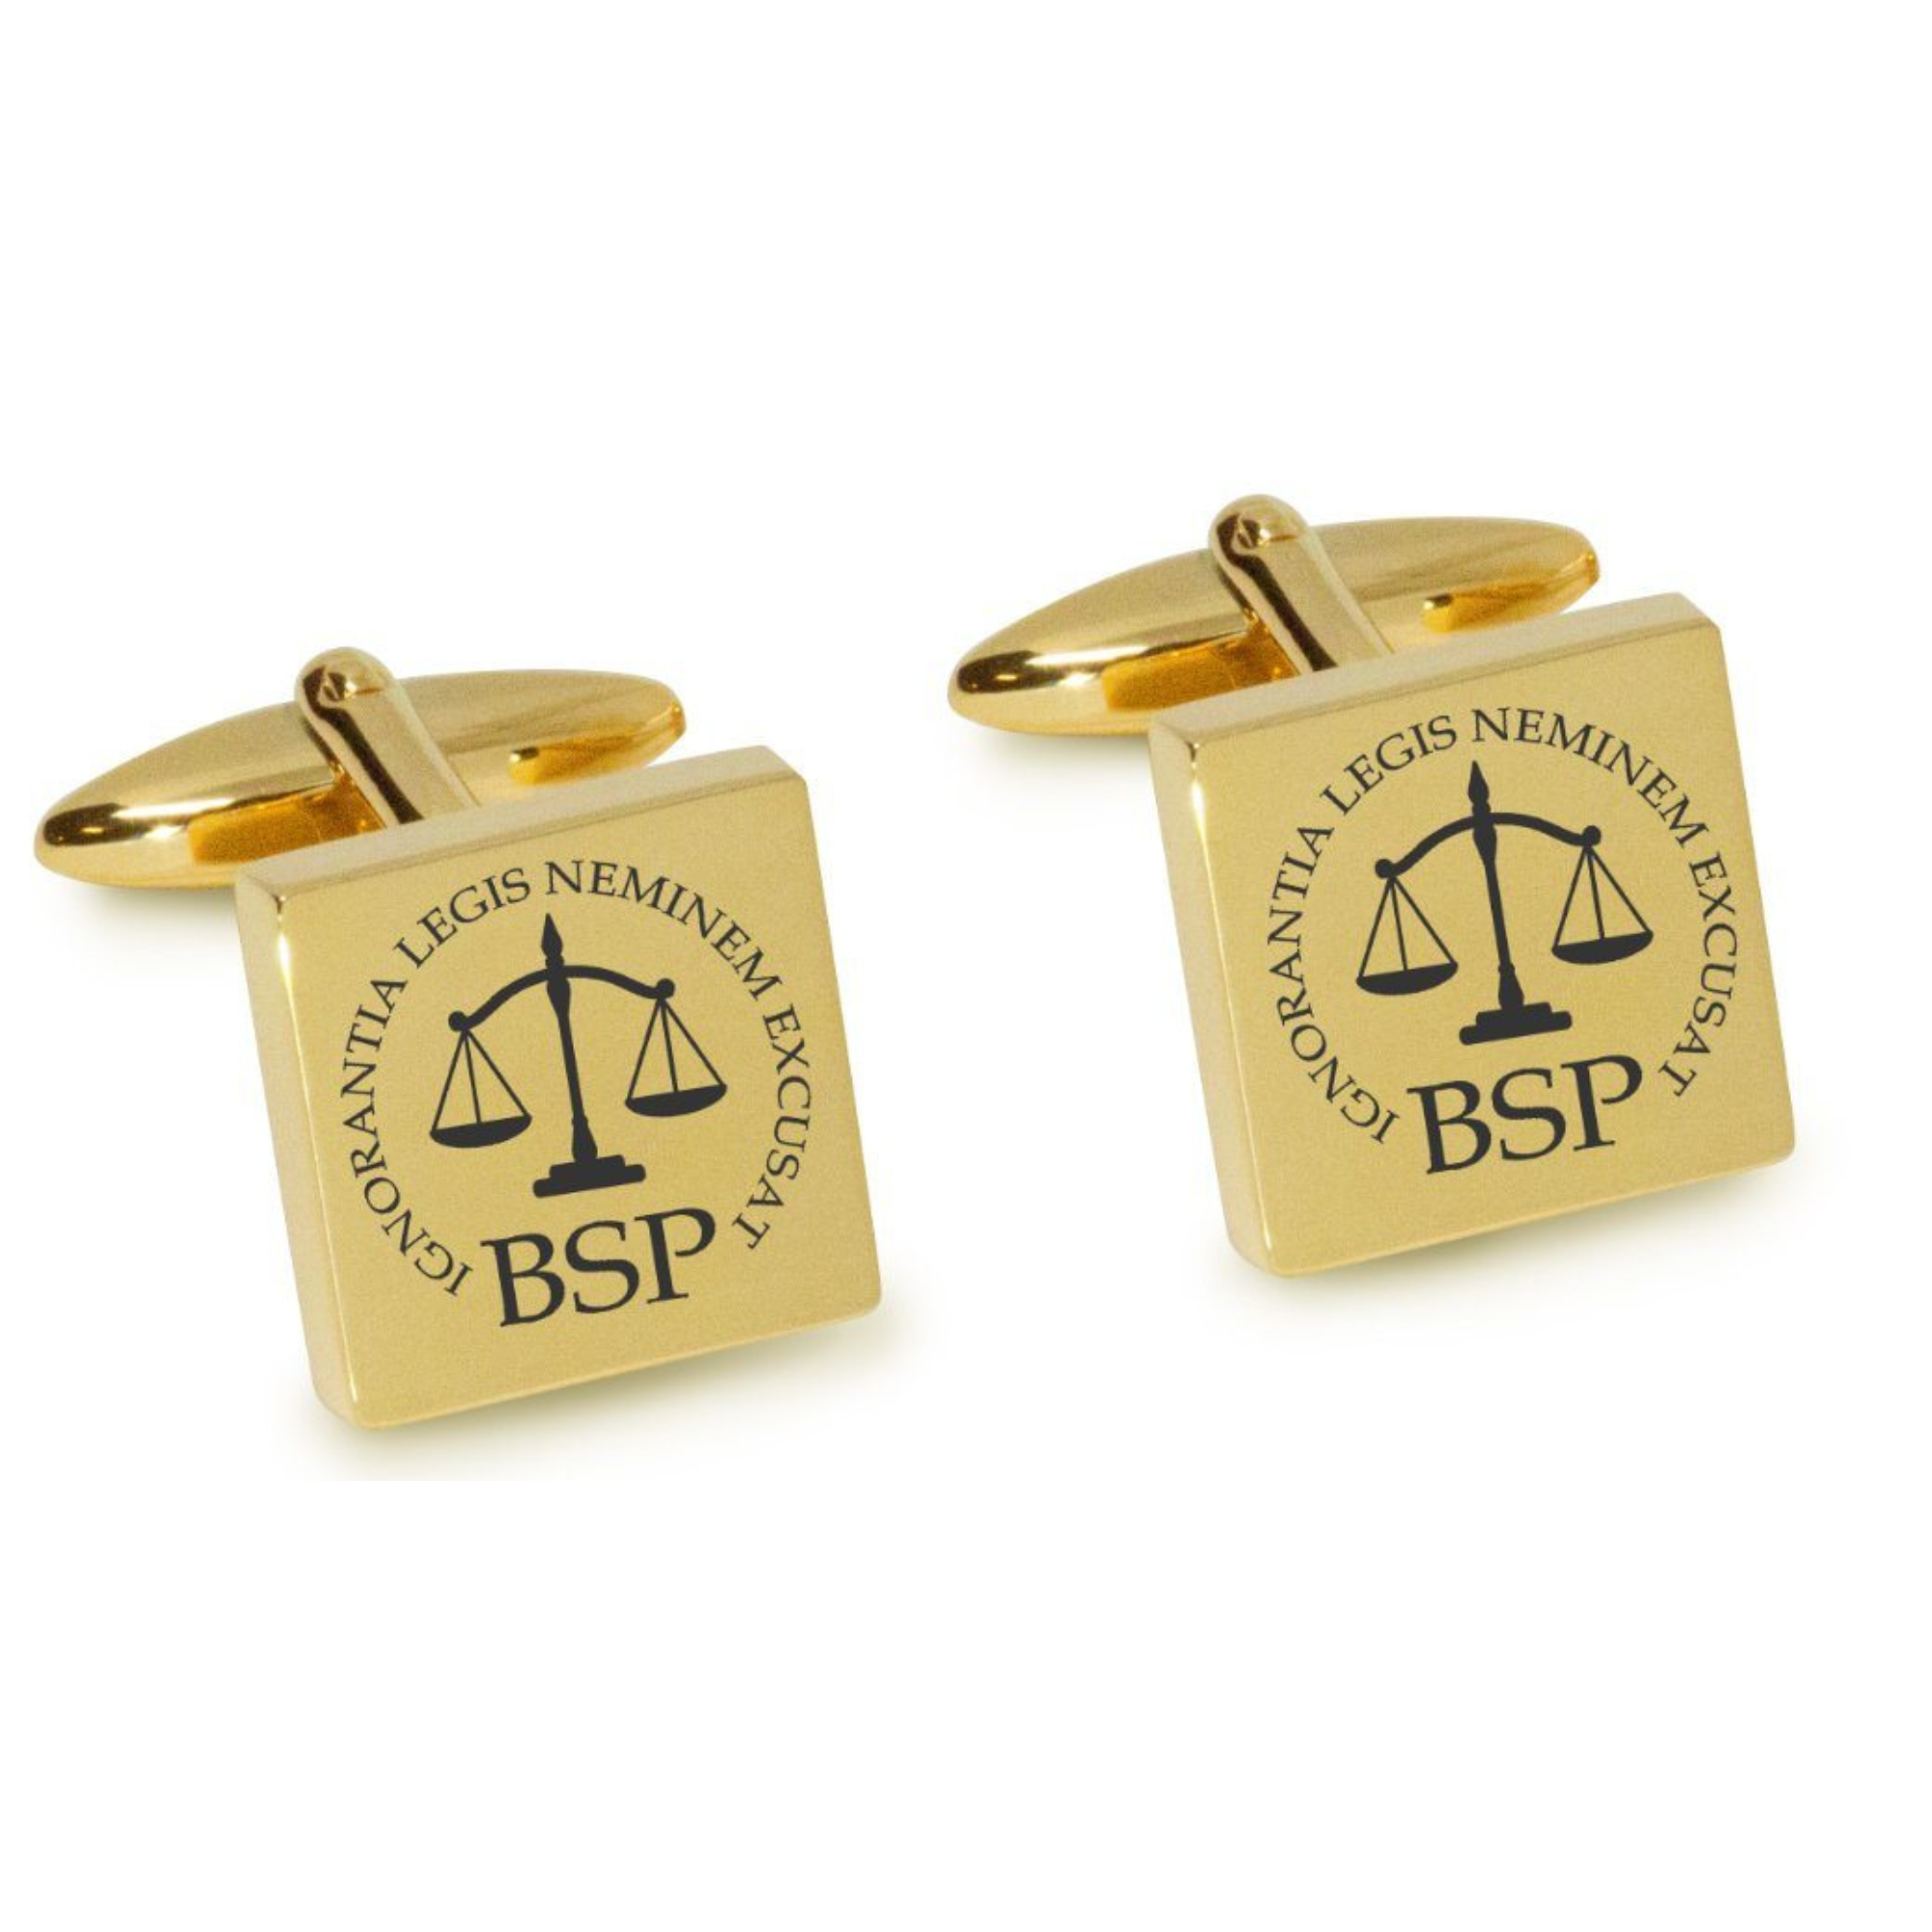 Lawyer's Initials and Legal Maxims Engraved Cufflinks in Gold